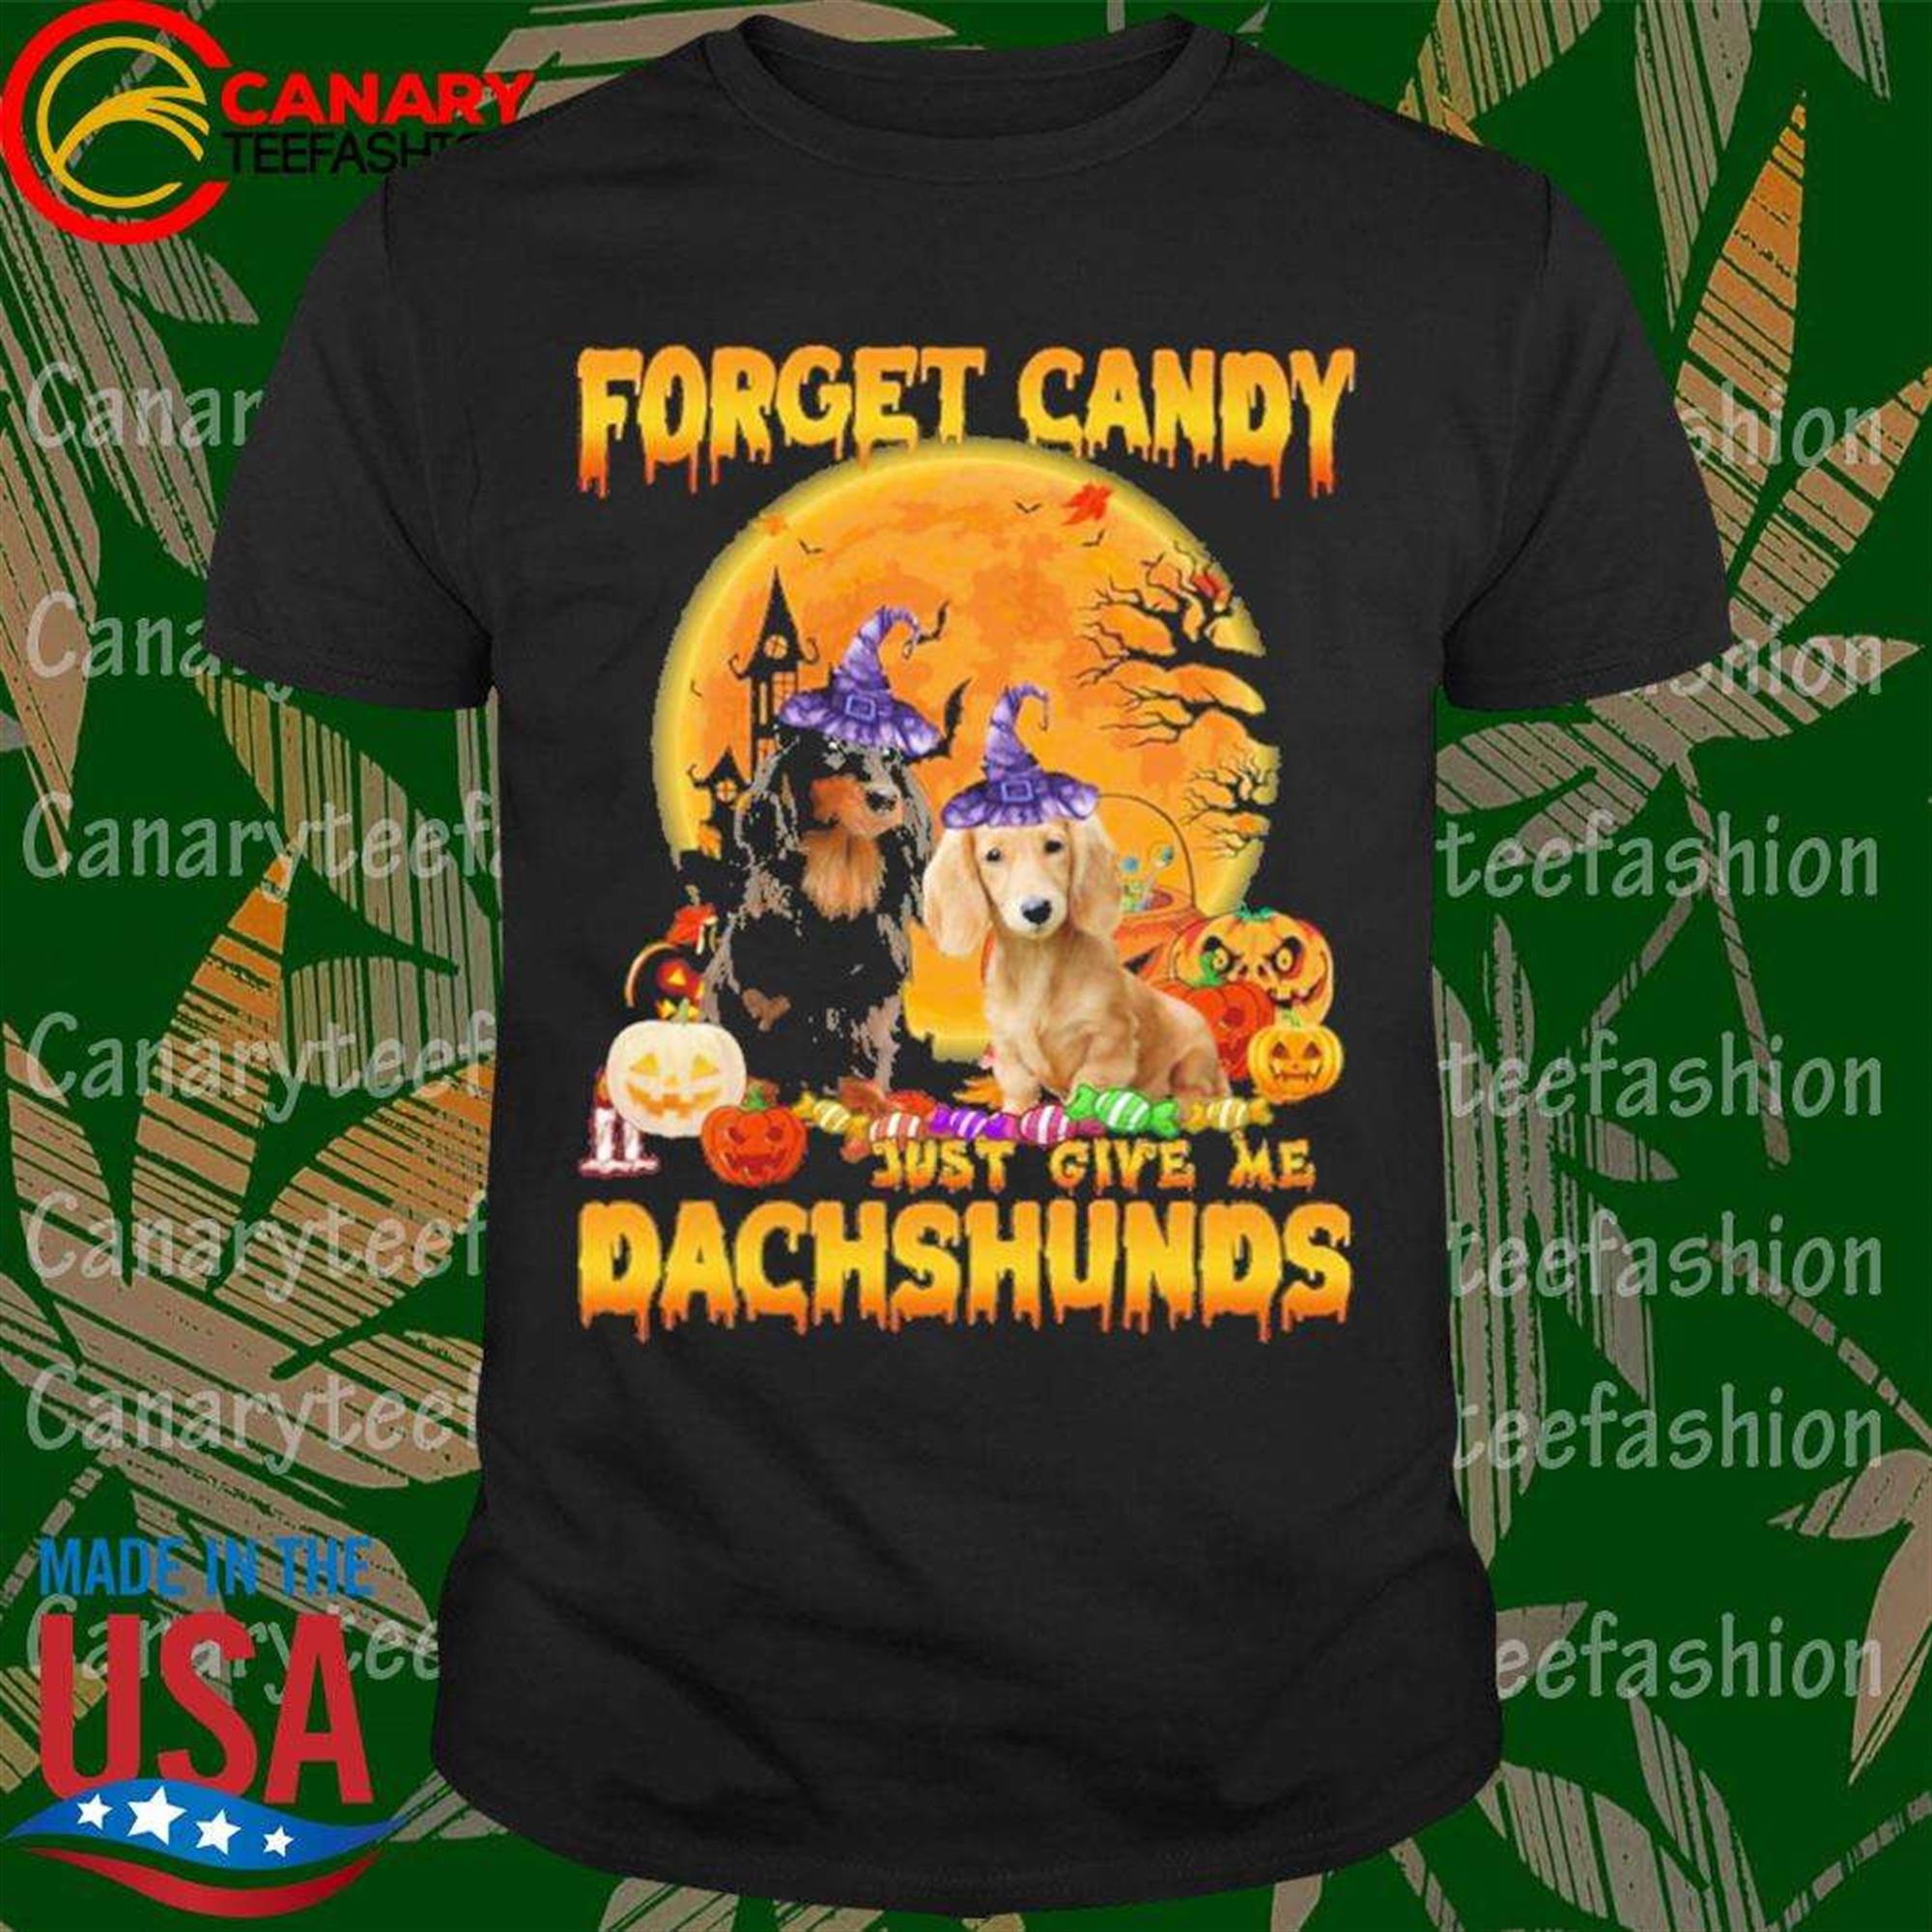 Forget Candy Just Give Me Dachshunds Witch And Pumpkin Halloween T-shirt Plus Size Up To 5xl